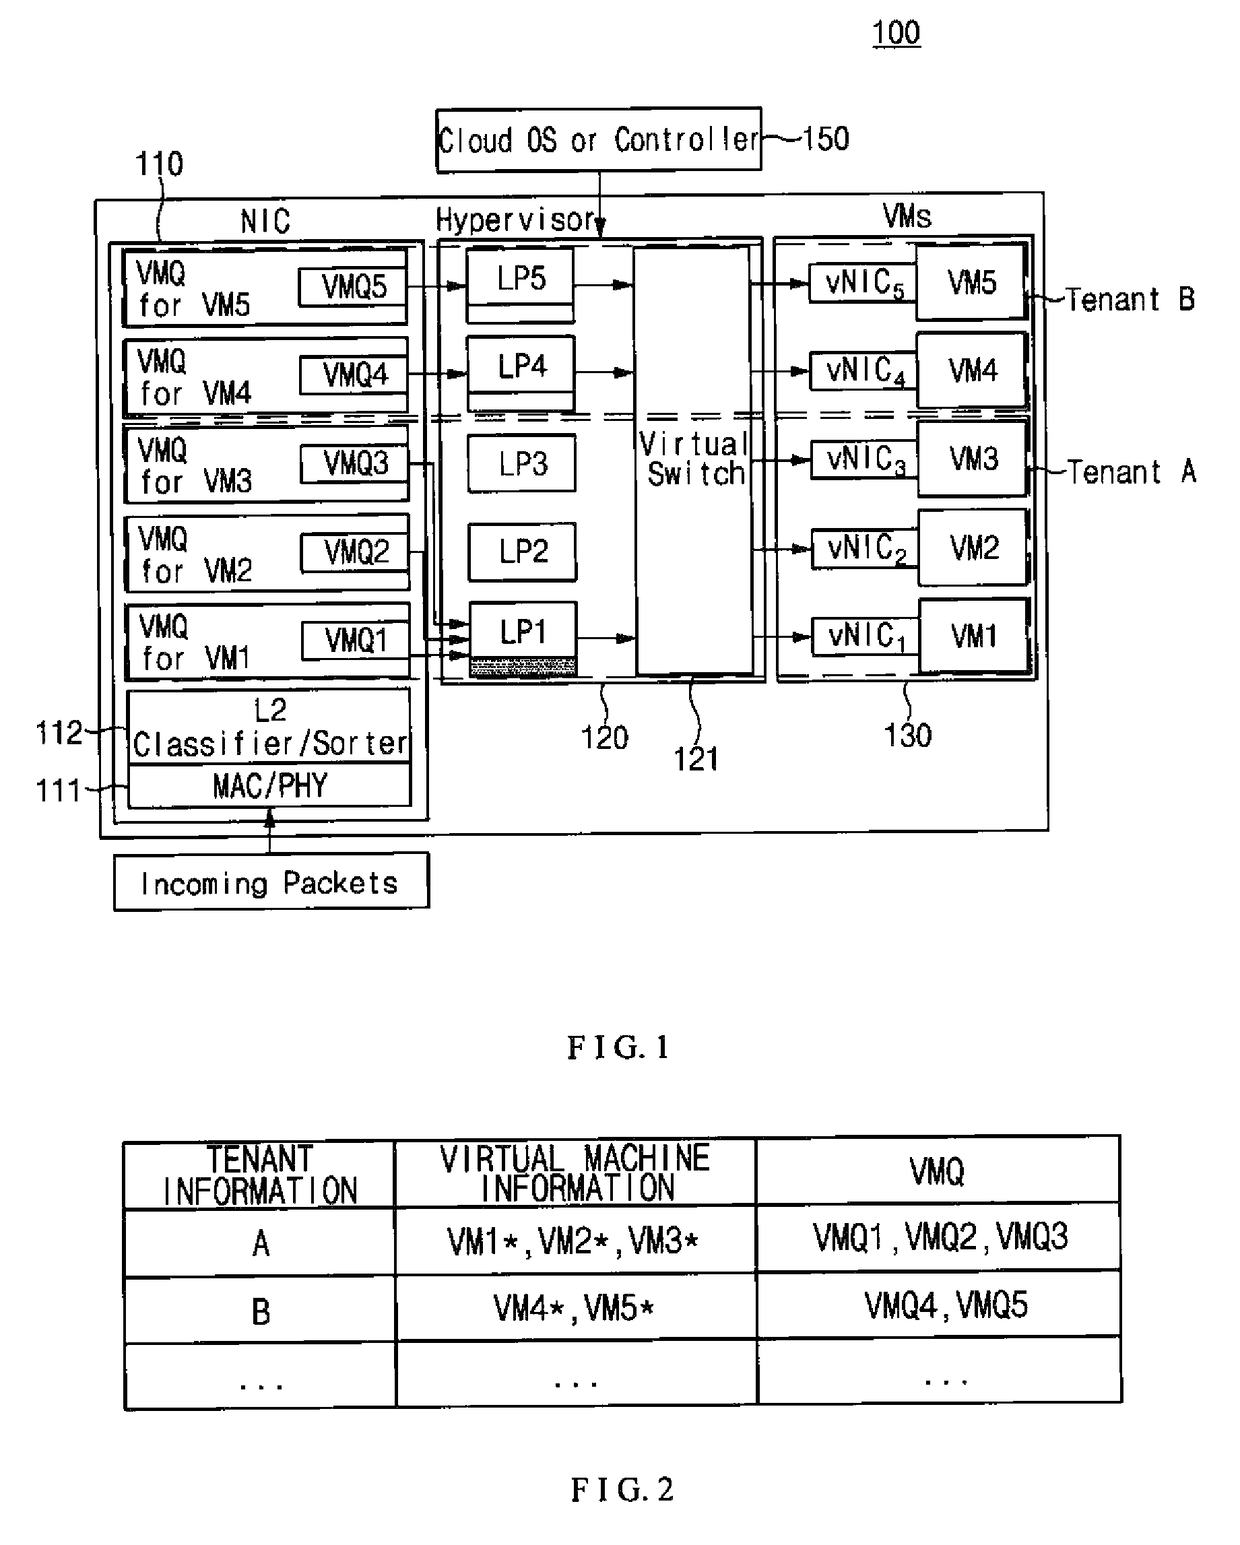 Apparatus and method for mapping of tenant based dynamic processor